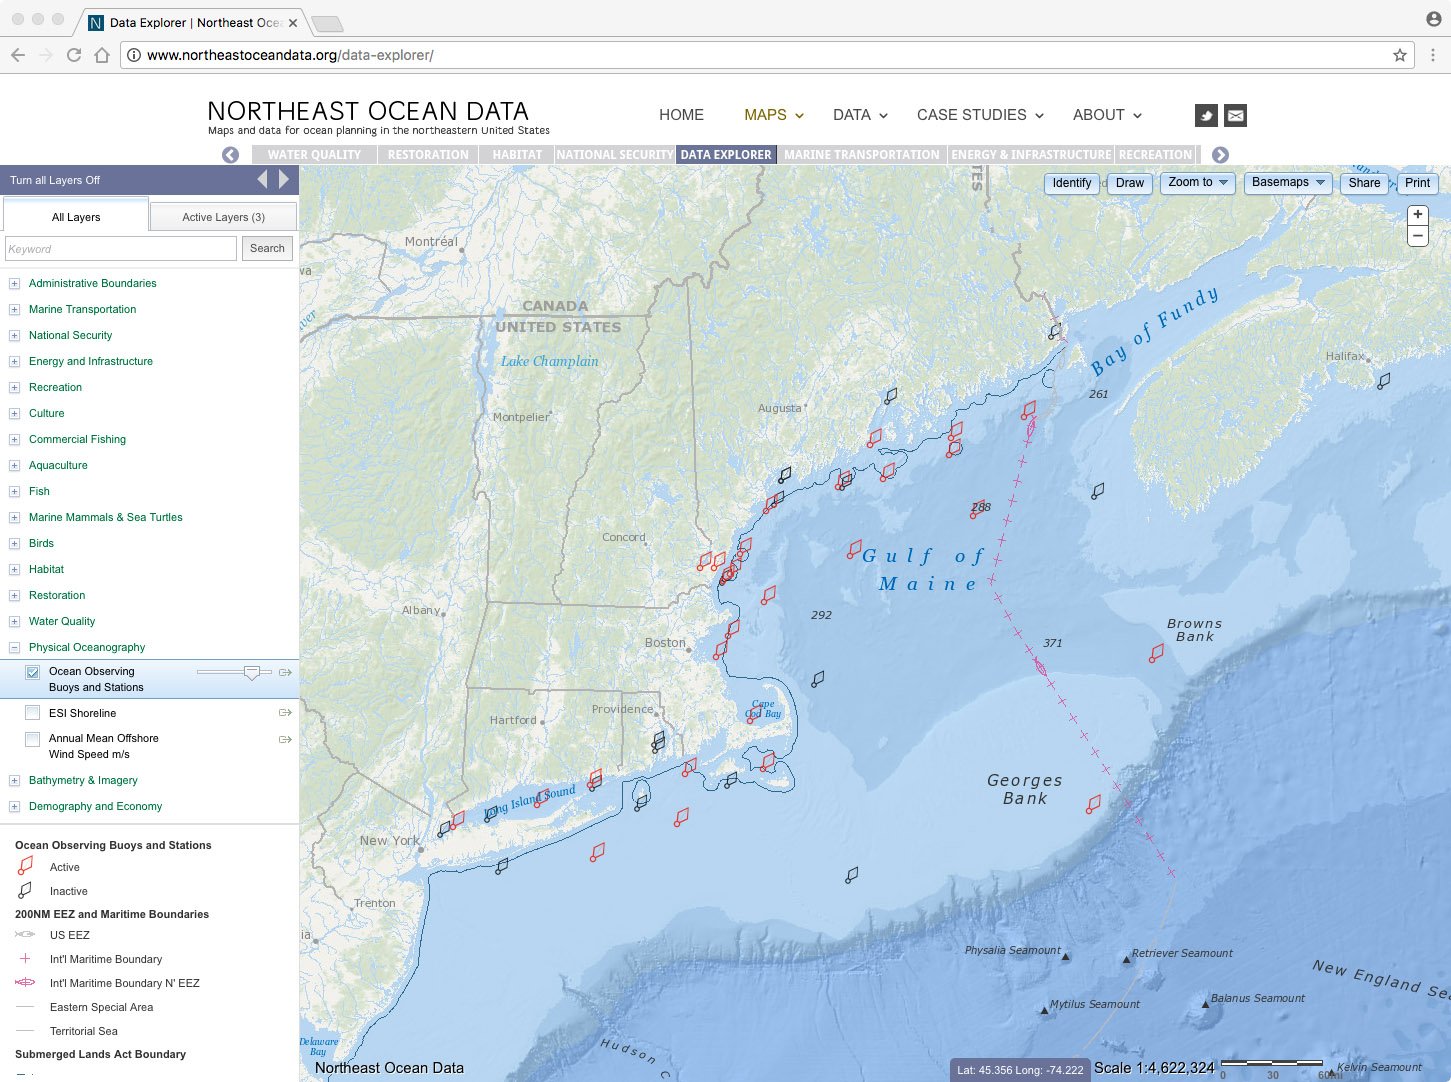 Screenshot of ocean observing buoys and stations layer